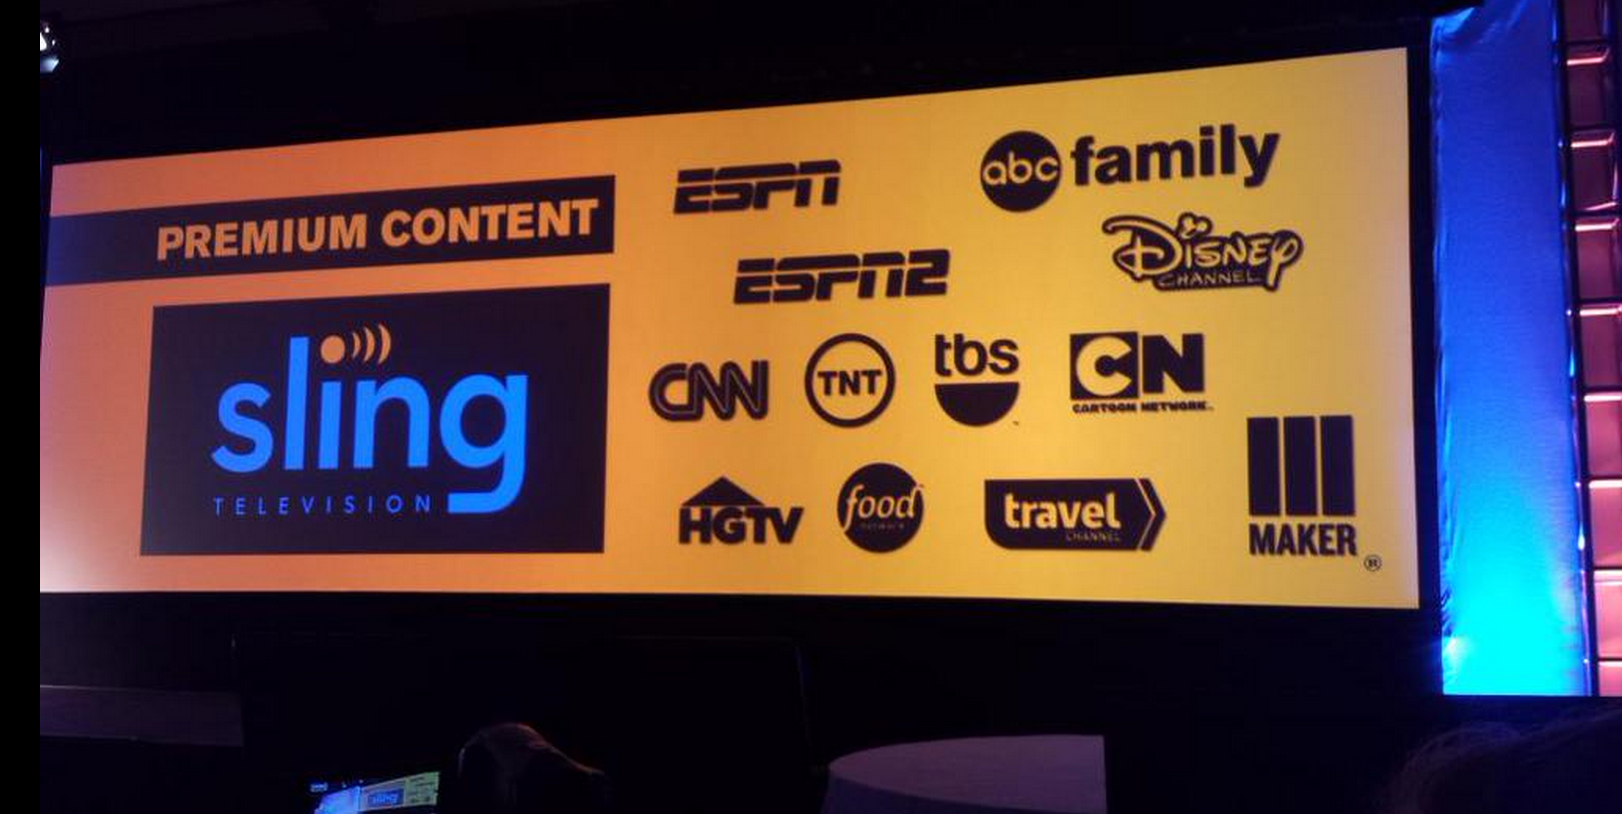 Dish To Launch Standalone Sling TV Streaming Service For $20/Month